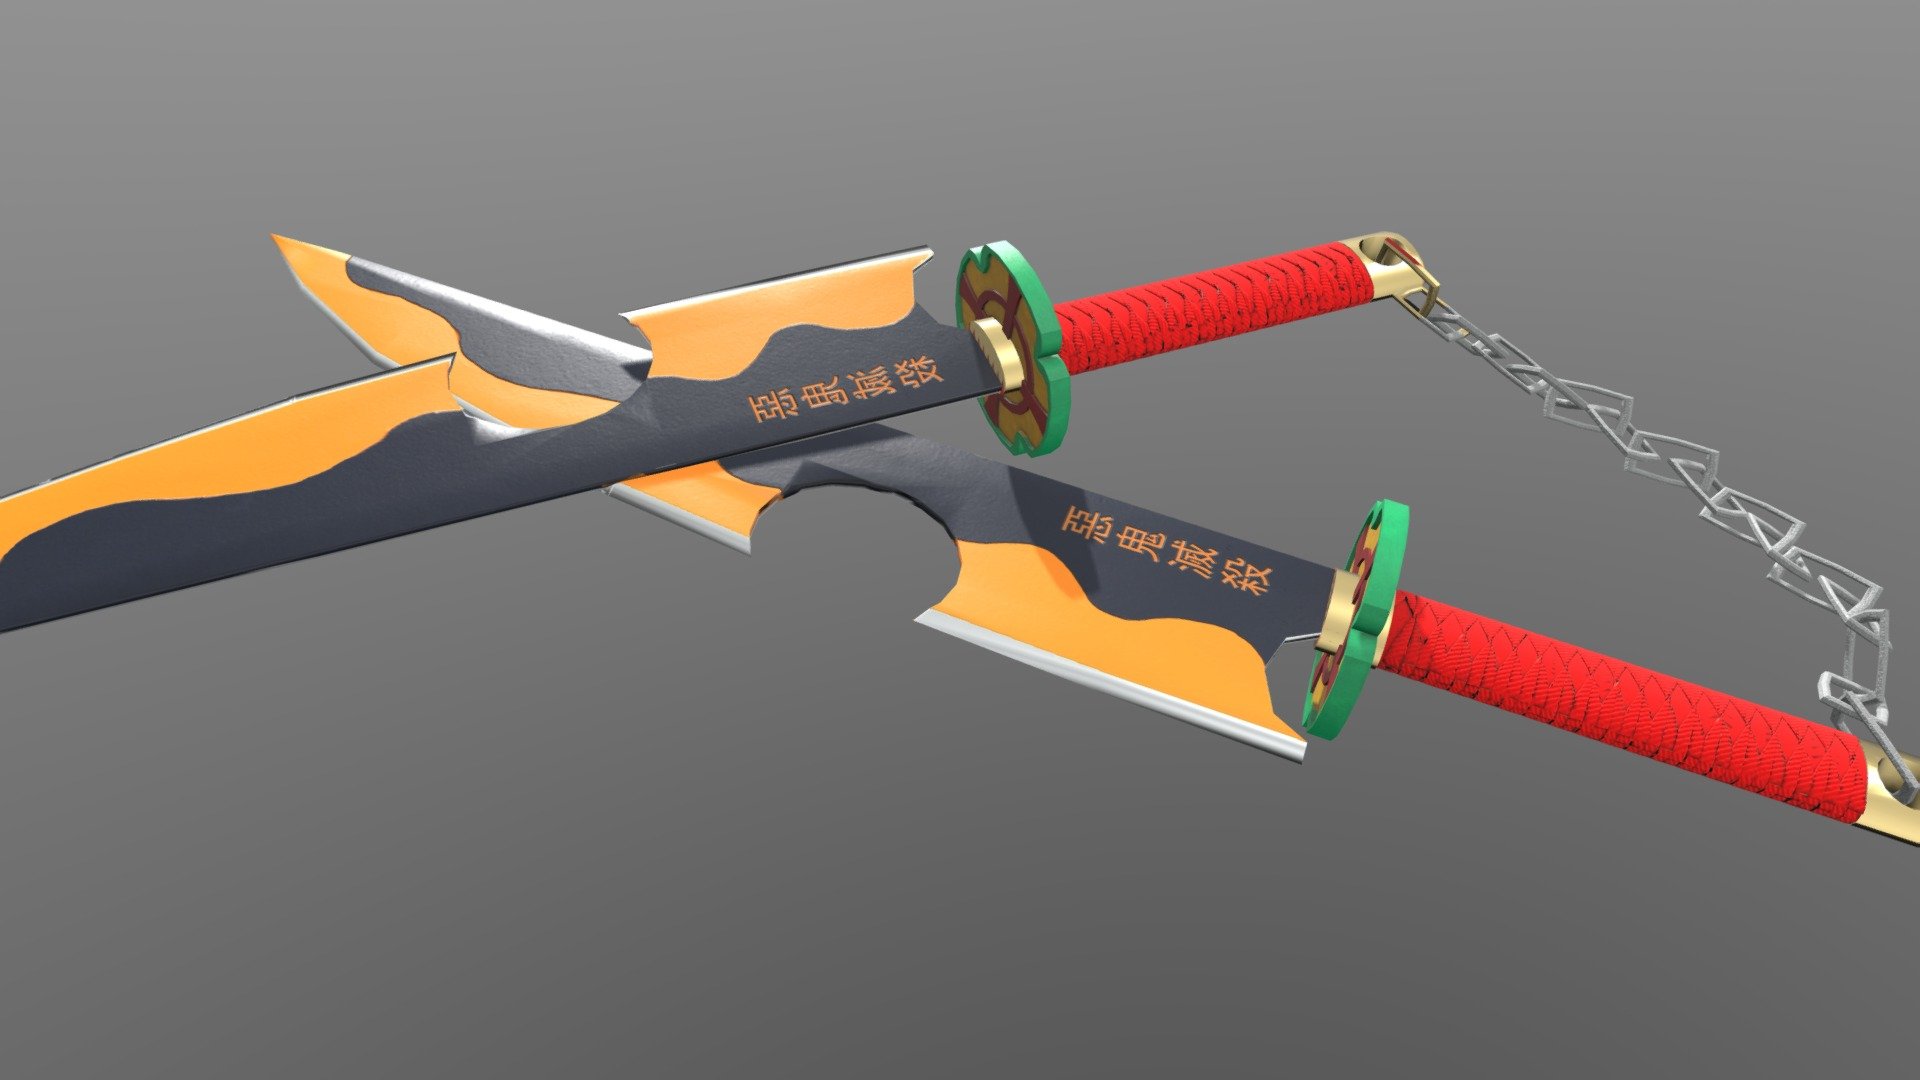 this is a recreation of uzuis nichirin blade from demon slayer season 2 / entertainment district arc - Tengen Uzui's Nichirin Blade // Demon Slayer - Download Free 3D model by Ash Kelly (@ashkelly) 3d model